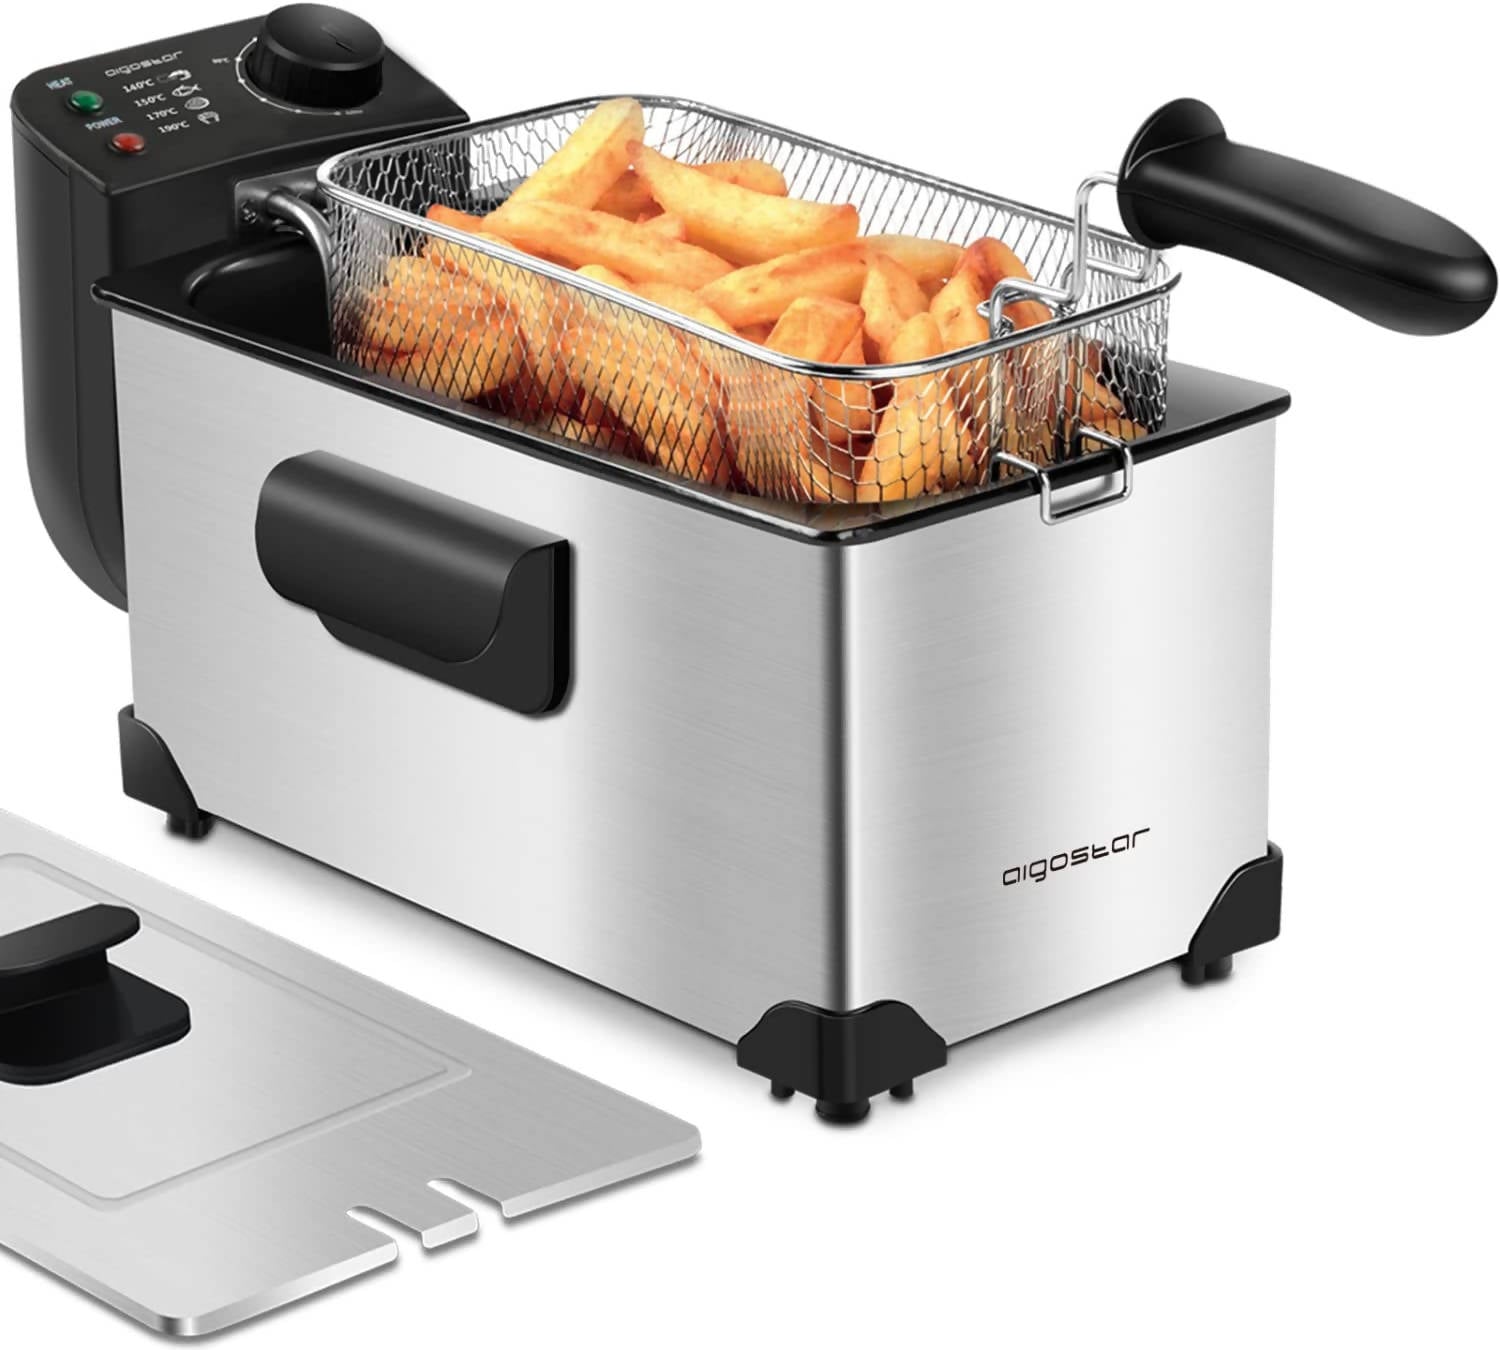 Aigostar Semi-Professional Fryer Stainless Steel 2200 Watts 3 Litres BPA Free